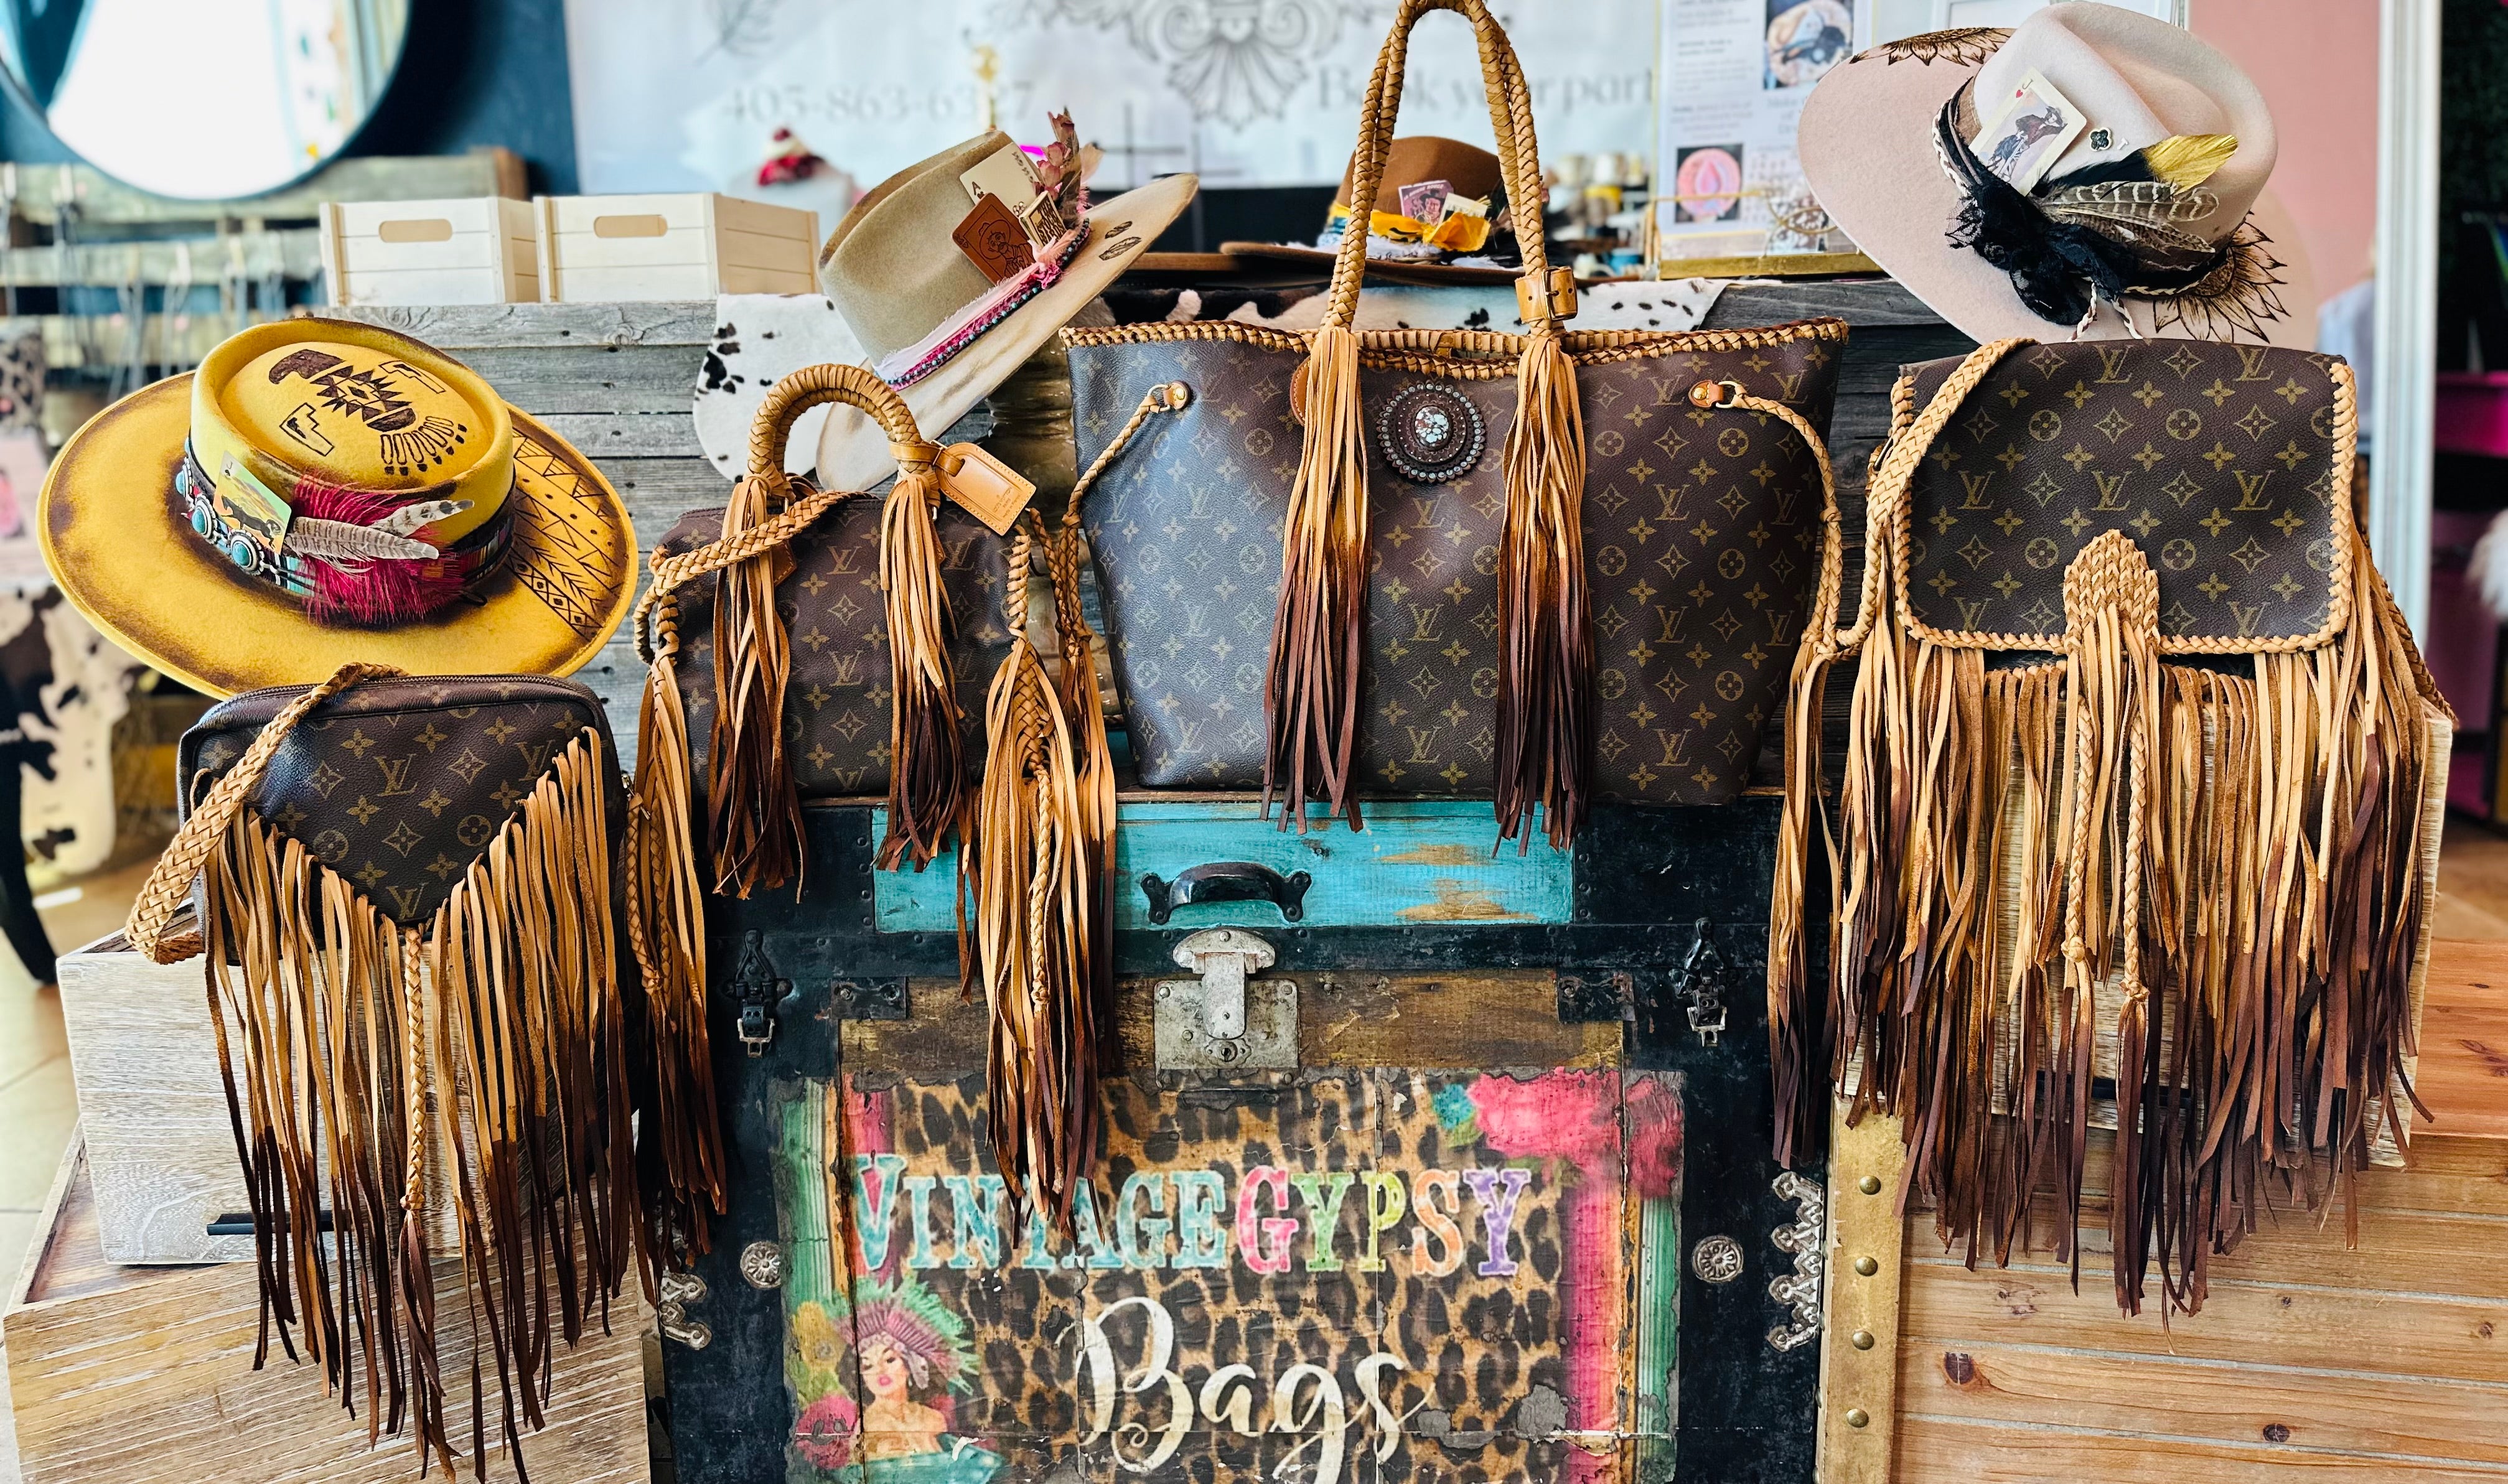 Best Louis Vuitton Fringe Bag for sale in Durant, Oklahoma for 2023